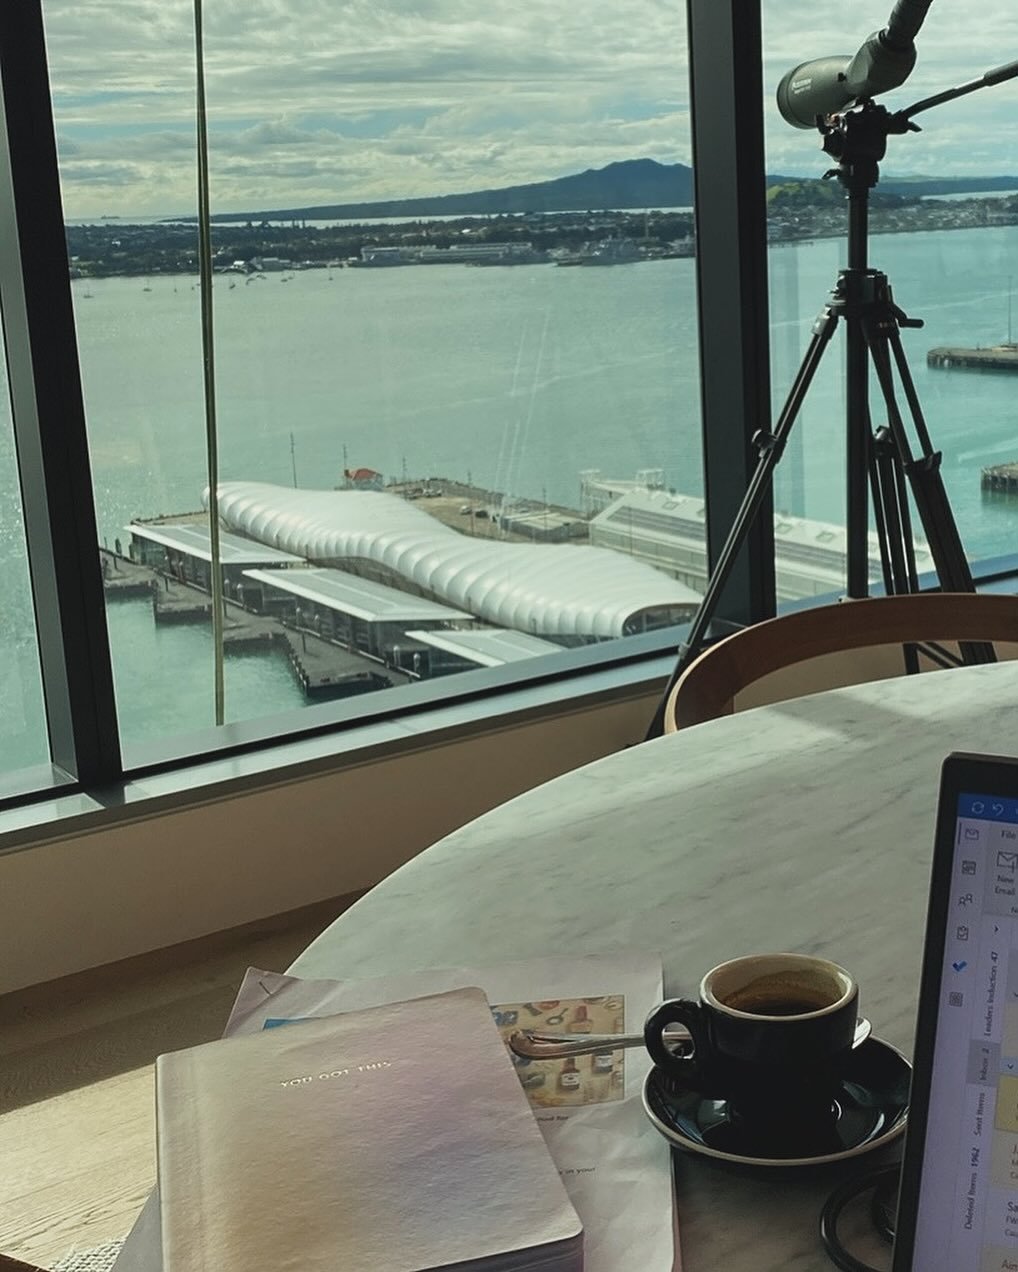 The view from the 'office' has been a little different this week.

It's been so good getting out and connecting with some amazing coaches and facilitators across the industry.

The hottest topic right now... CHANGE - Change Leadership, Change Mindset